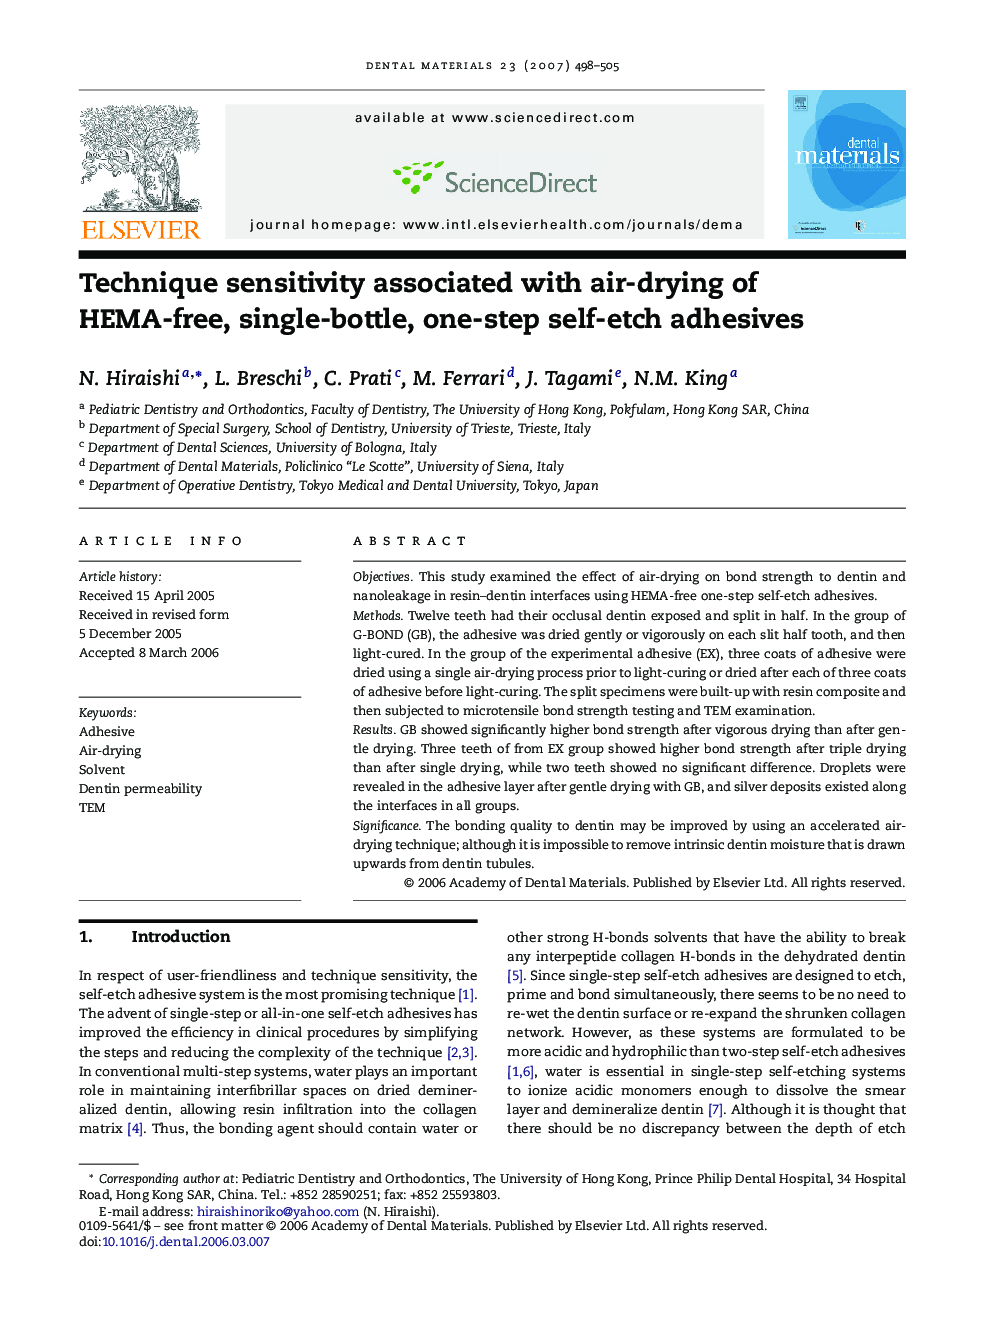 Technique sensitivity associated with air-drying of HEMA-free, single-bottle, one-step self-etch adhesives